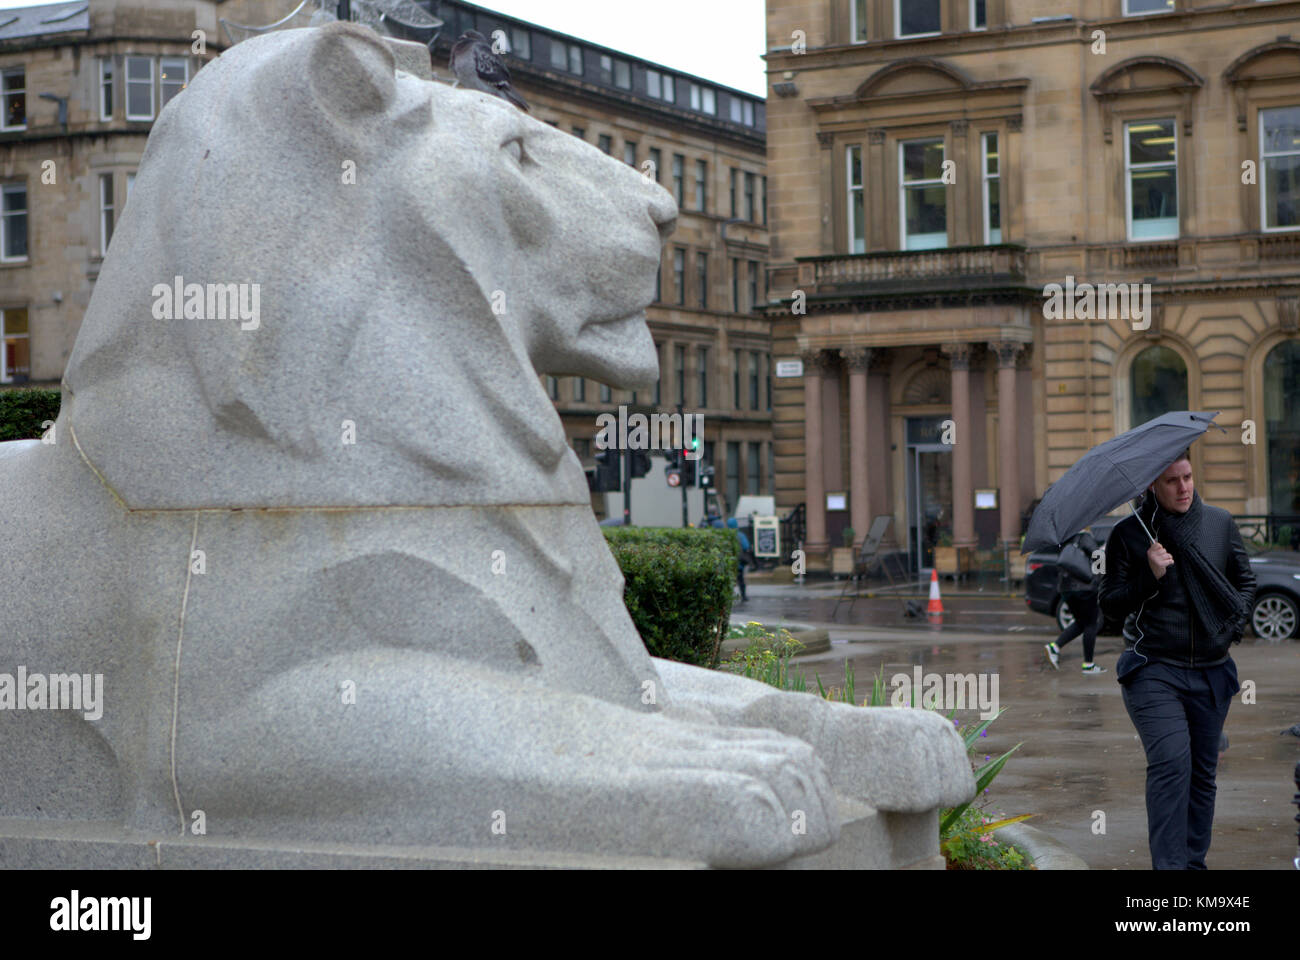 cenotaph lion statue sculpture woman with umbrella  Dark rainy day as people shop through the city Stock Photo